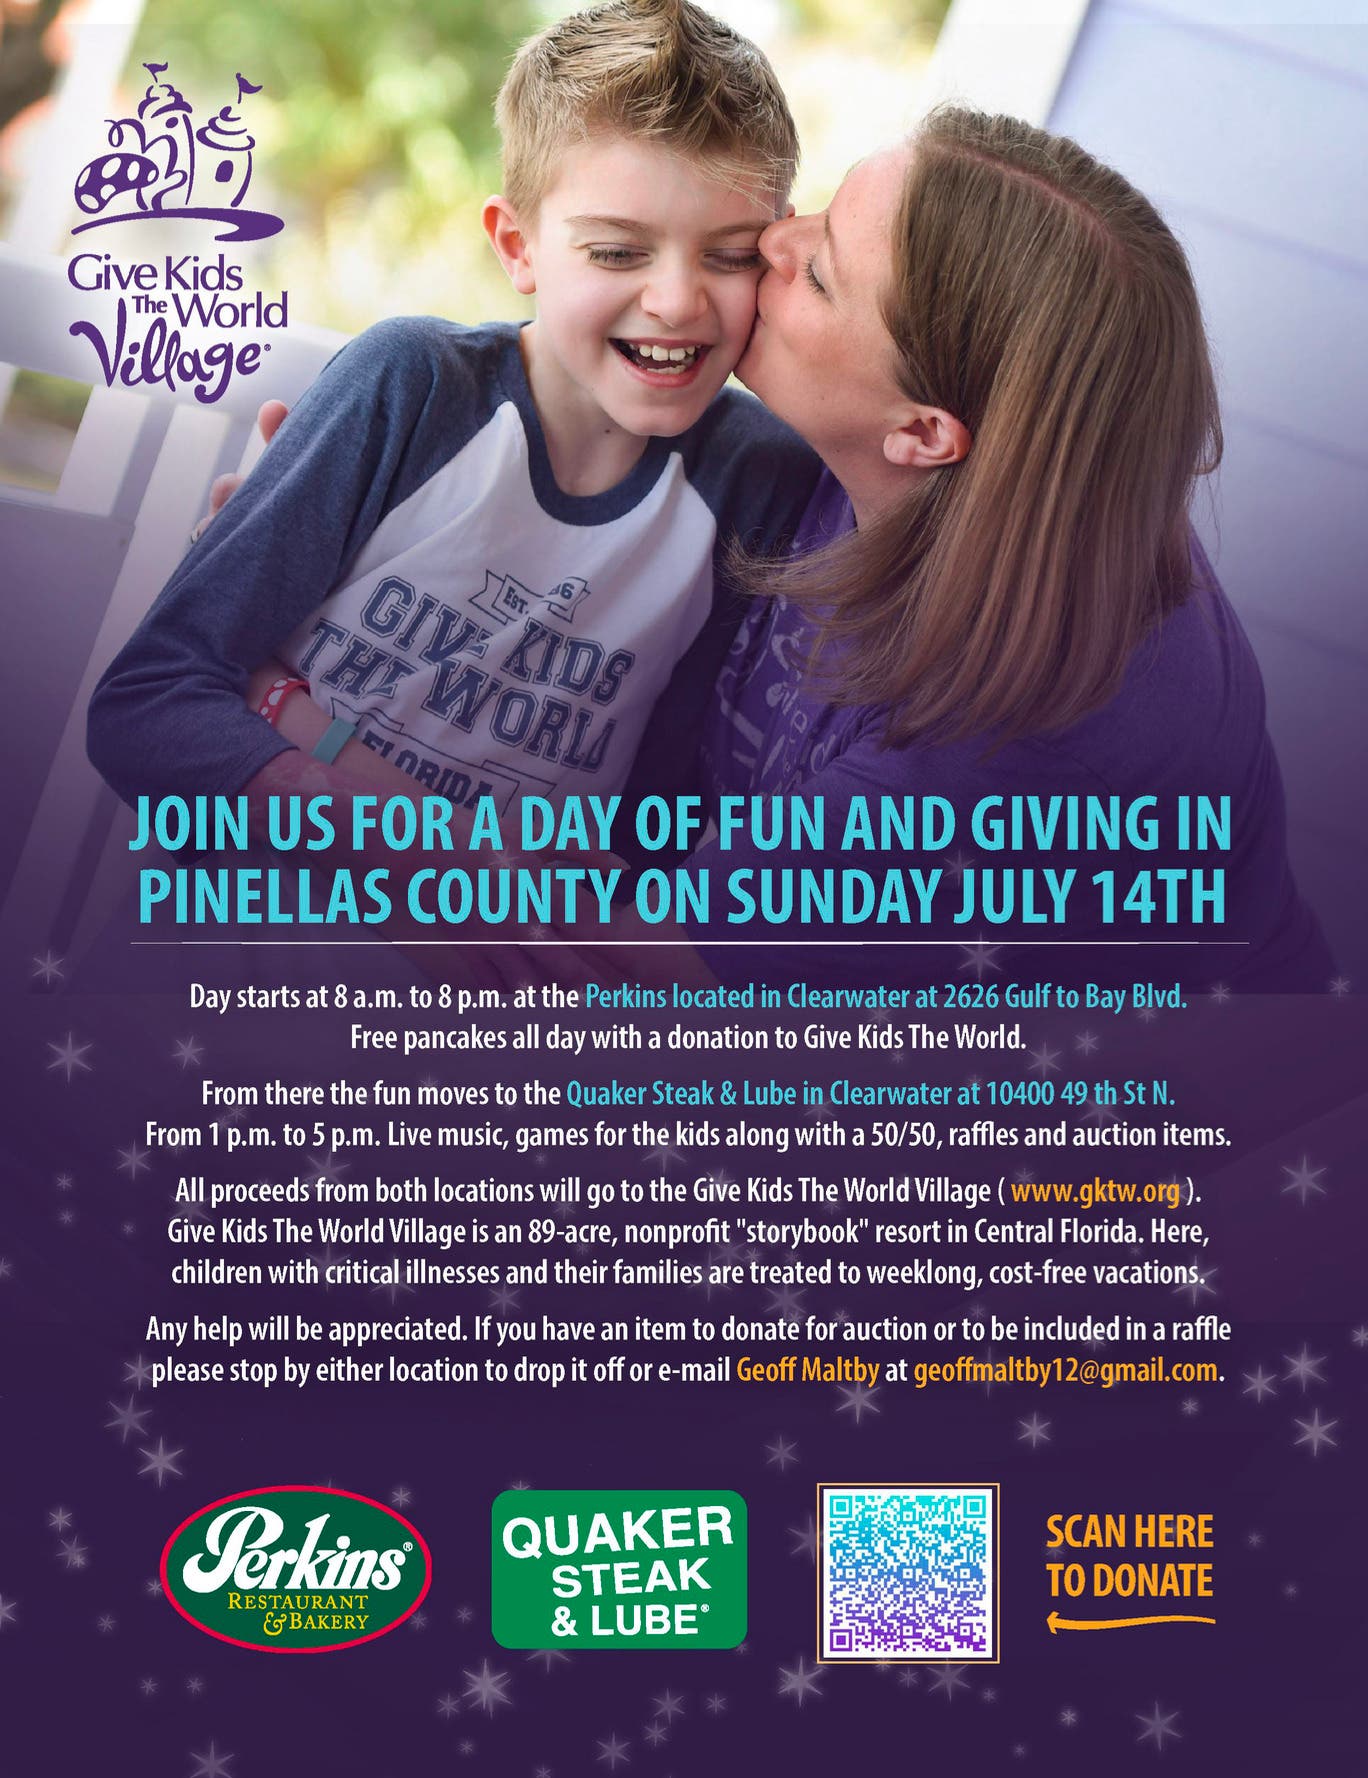 Join us for a day of fun and giving in Pinellas County on Sunday, July 14th